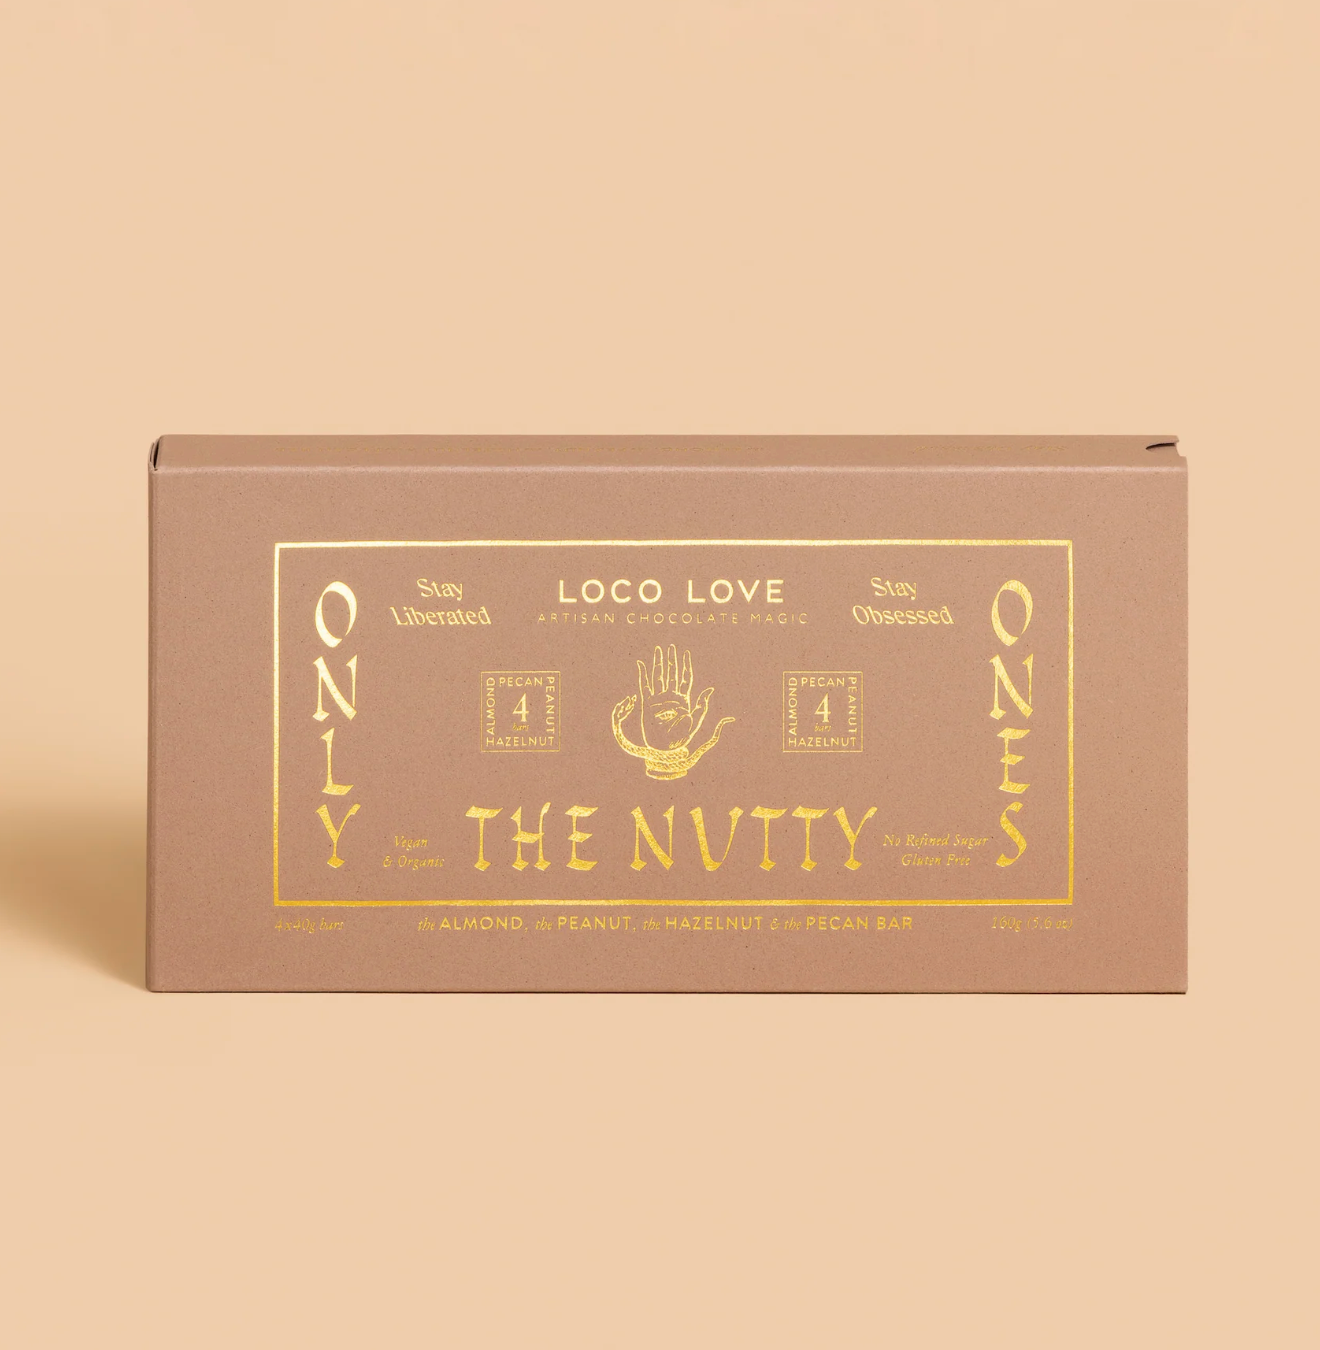 The Nutty One's Box - Loco Love